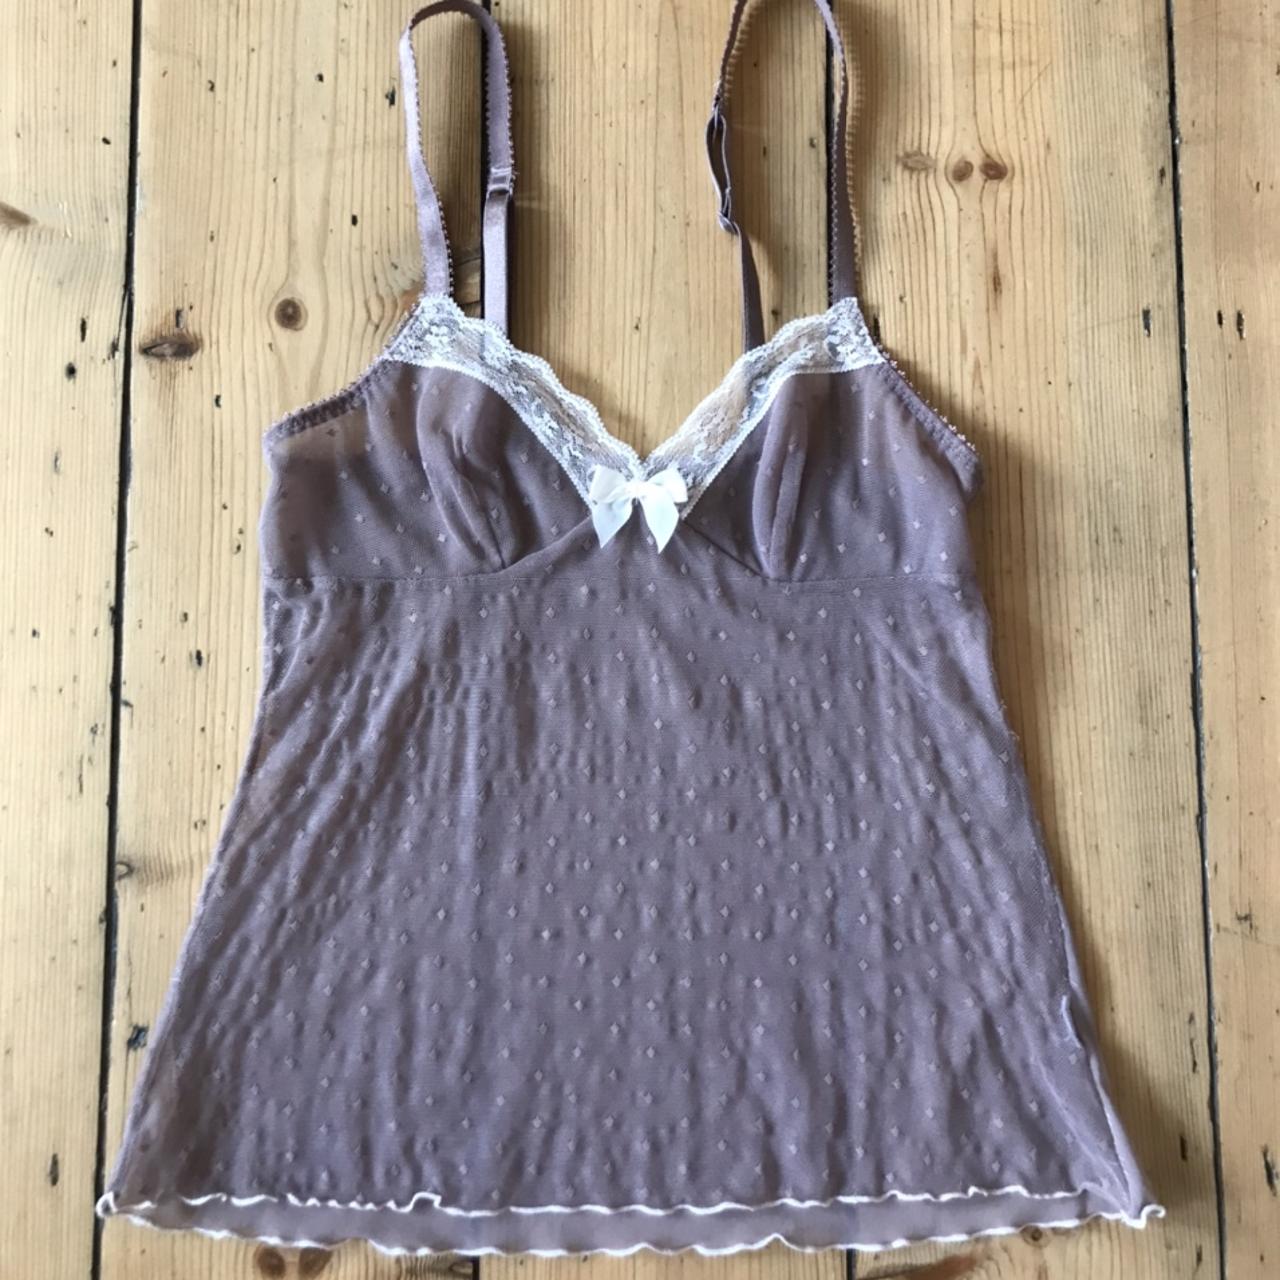 Aerie Striped Lace Tank Top • Color Grey with Blue - Depop